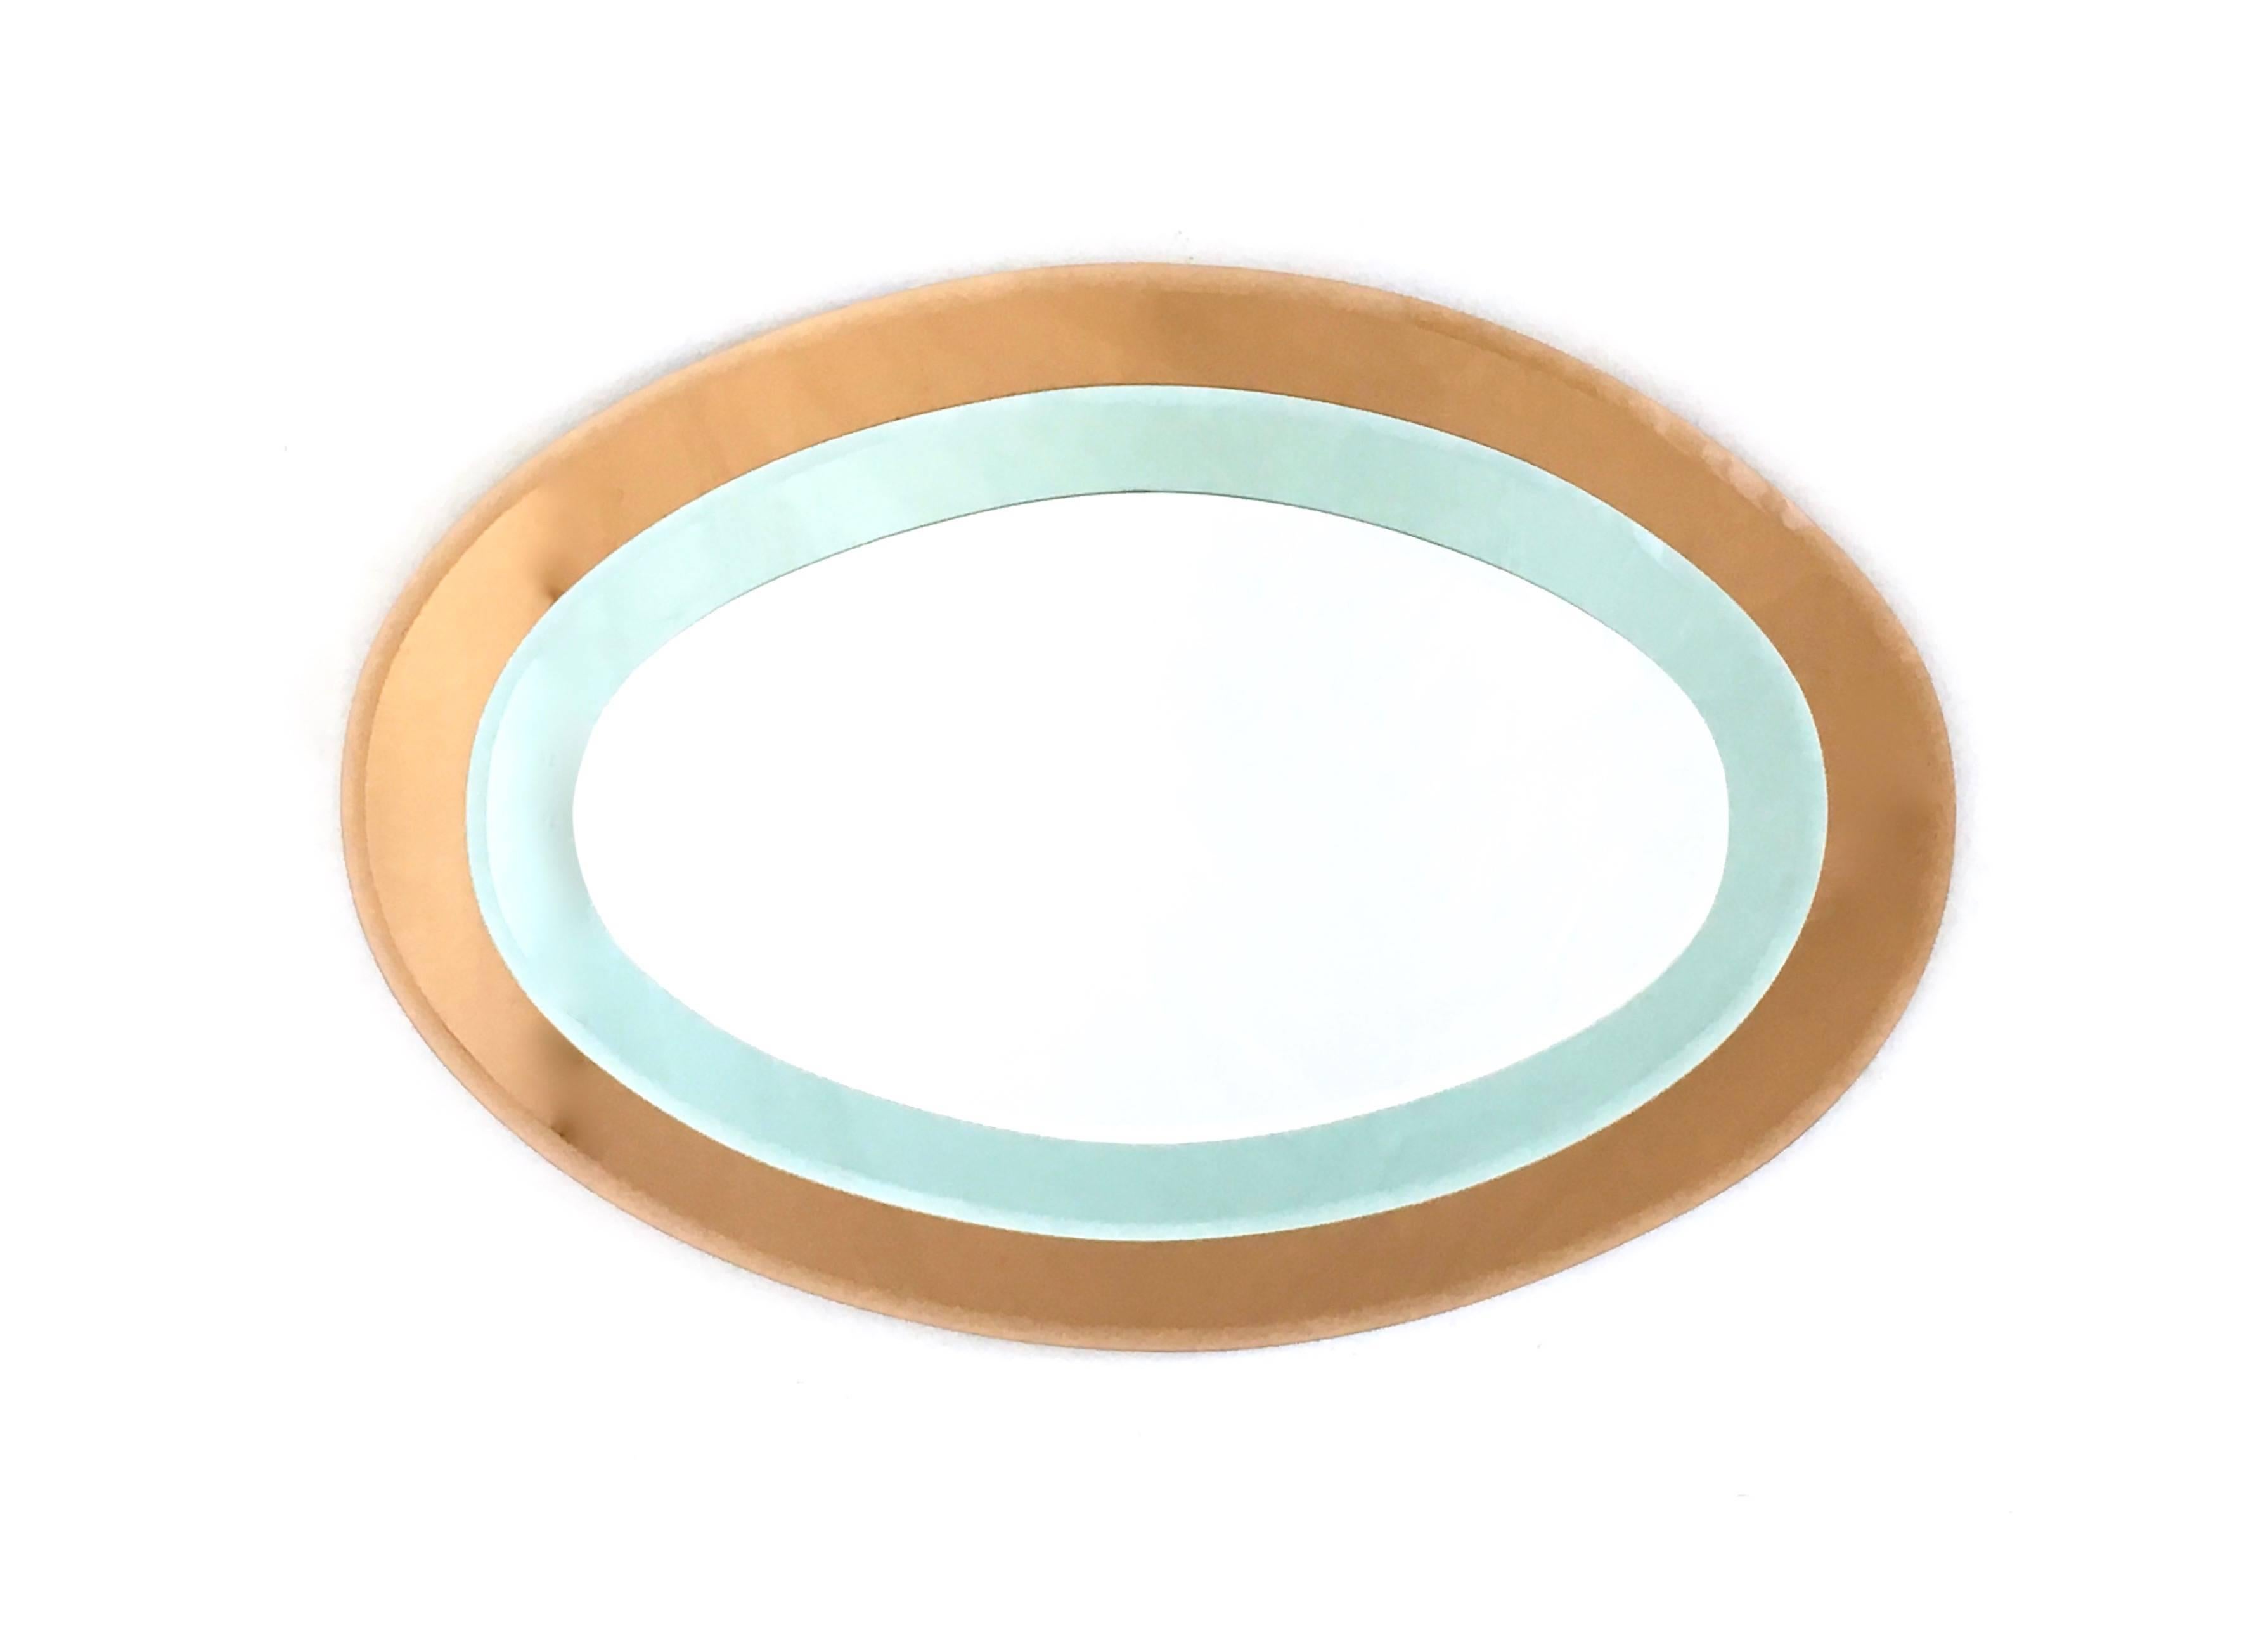 It can be used both horizontally or vertically.
It features three different mirrors in different colors: Silver, bronzed rose and teal.
In perfect vintage condition.